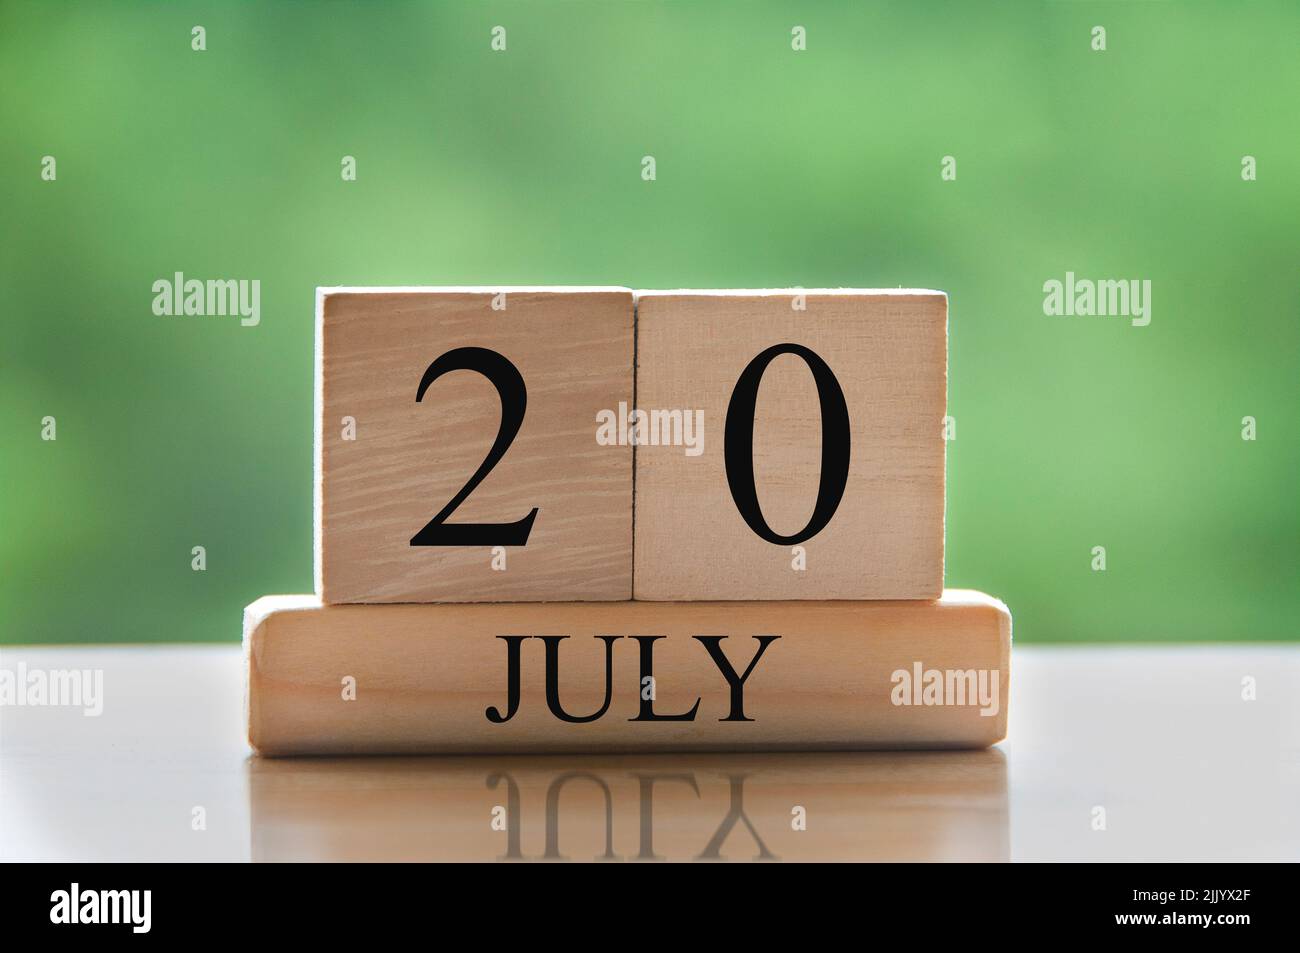 July 20 calendar date text on wooden blocks with blurred background park. Concept Stock Photo